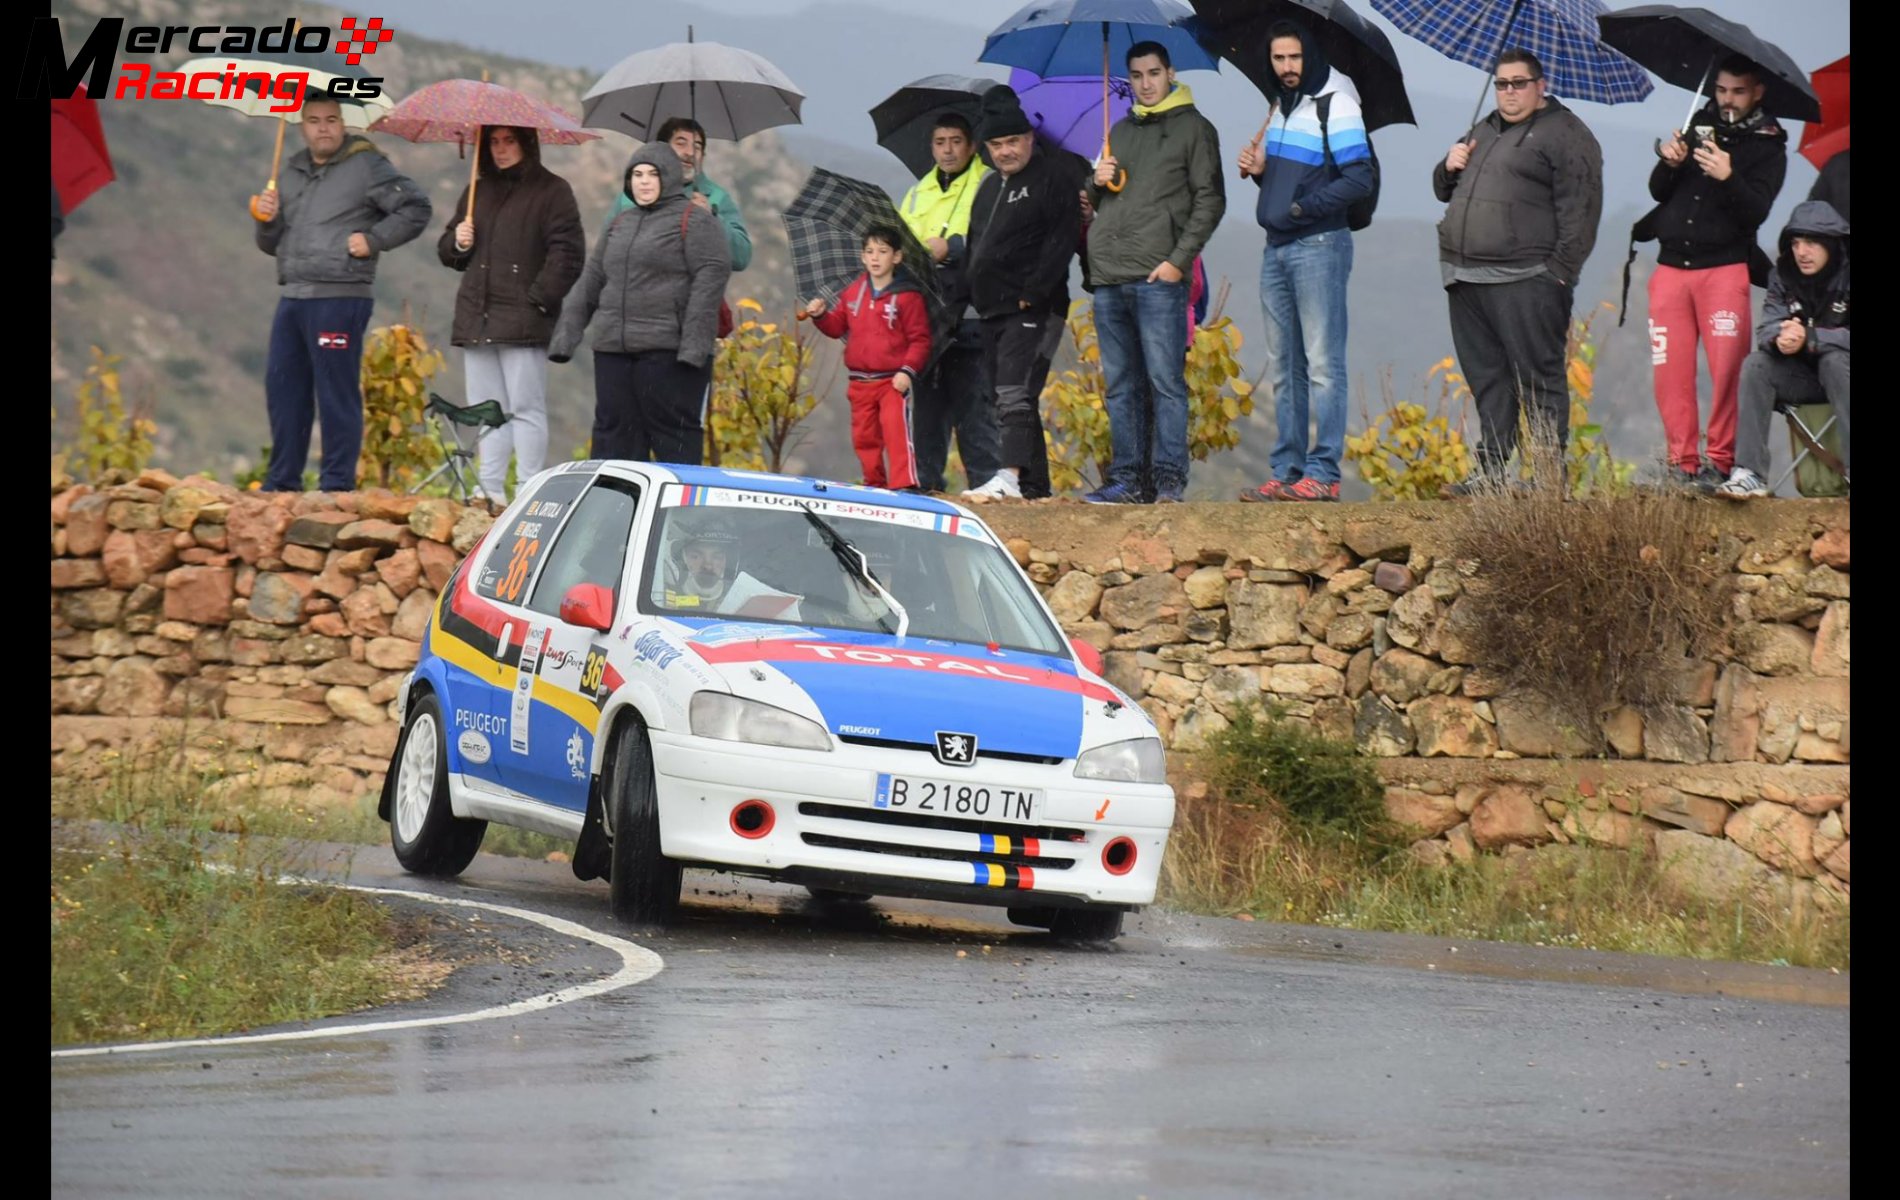 Peugeot 106 rally tope gr.a